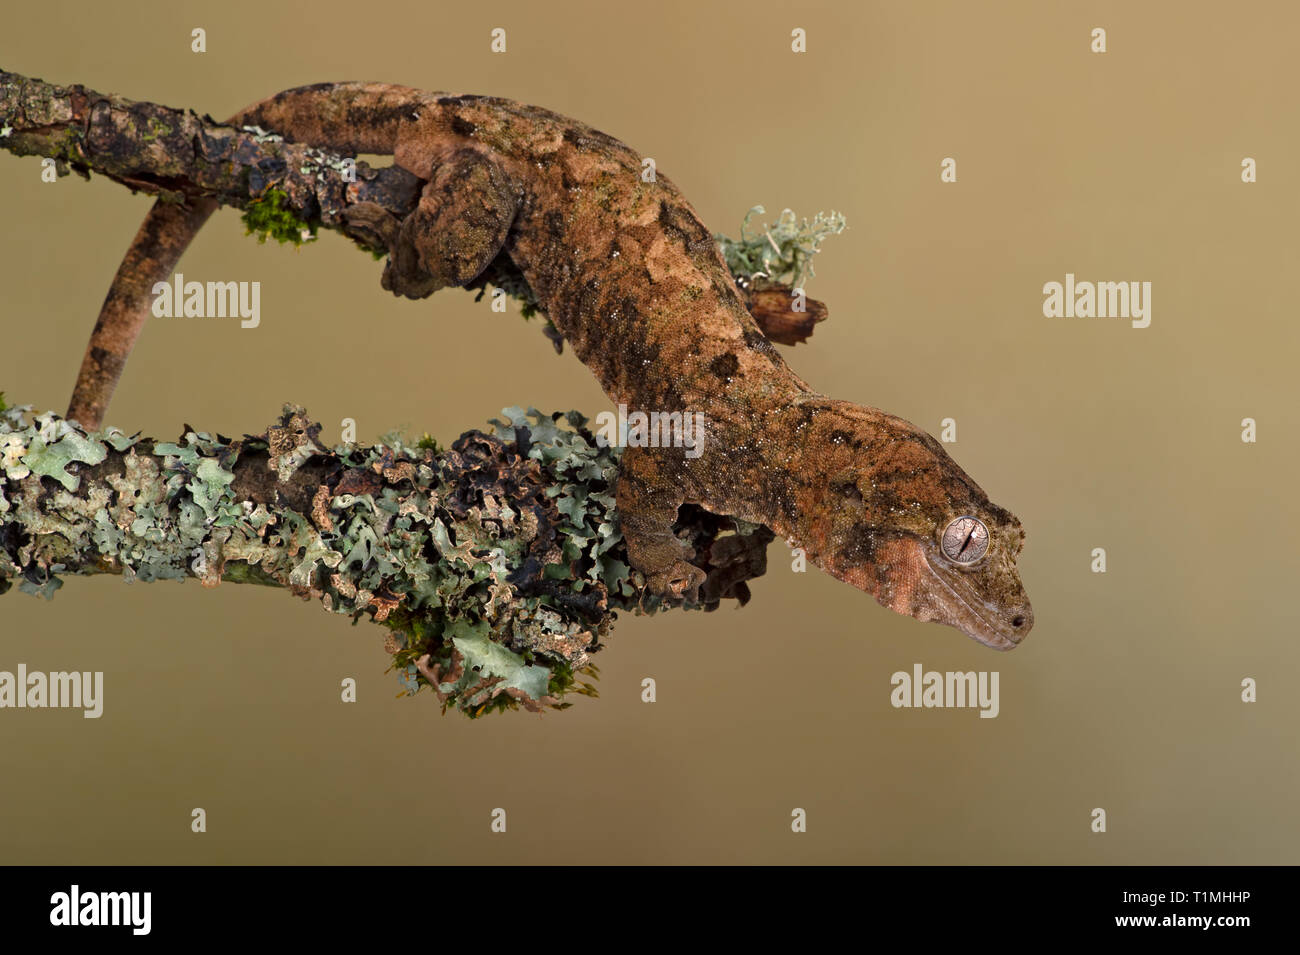 Mossy Prehensile Tail Gecko (Mniarogekko chahoua) camouflaged against a lichen covered branch Stock Photo